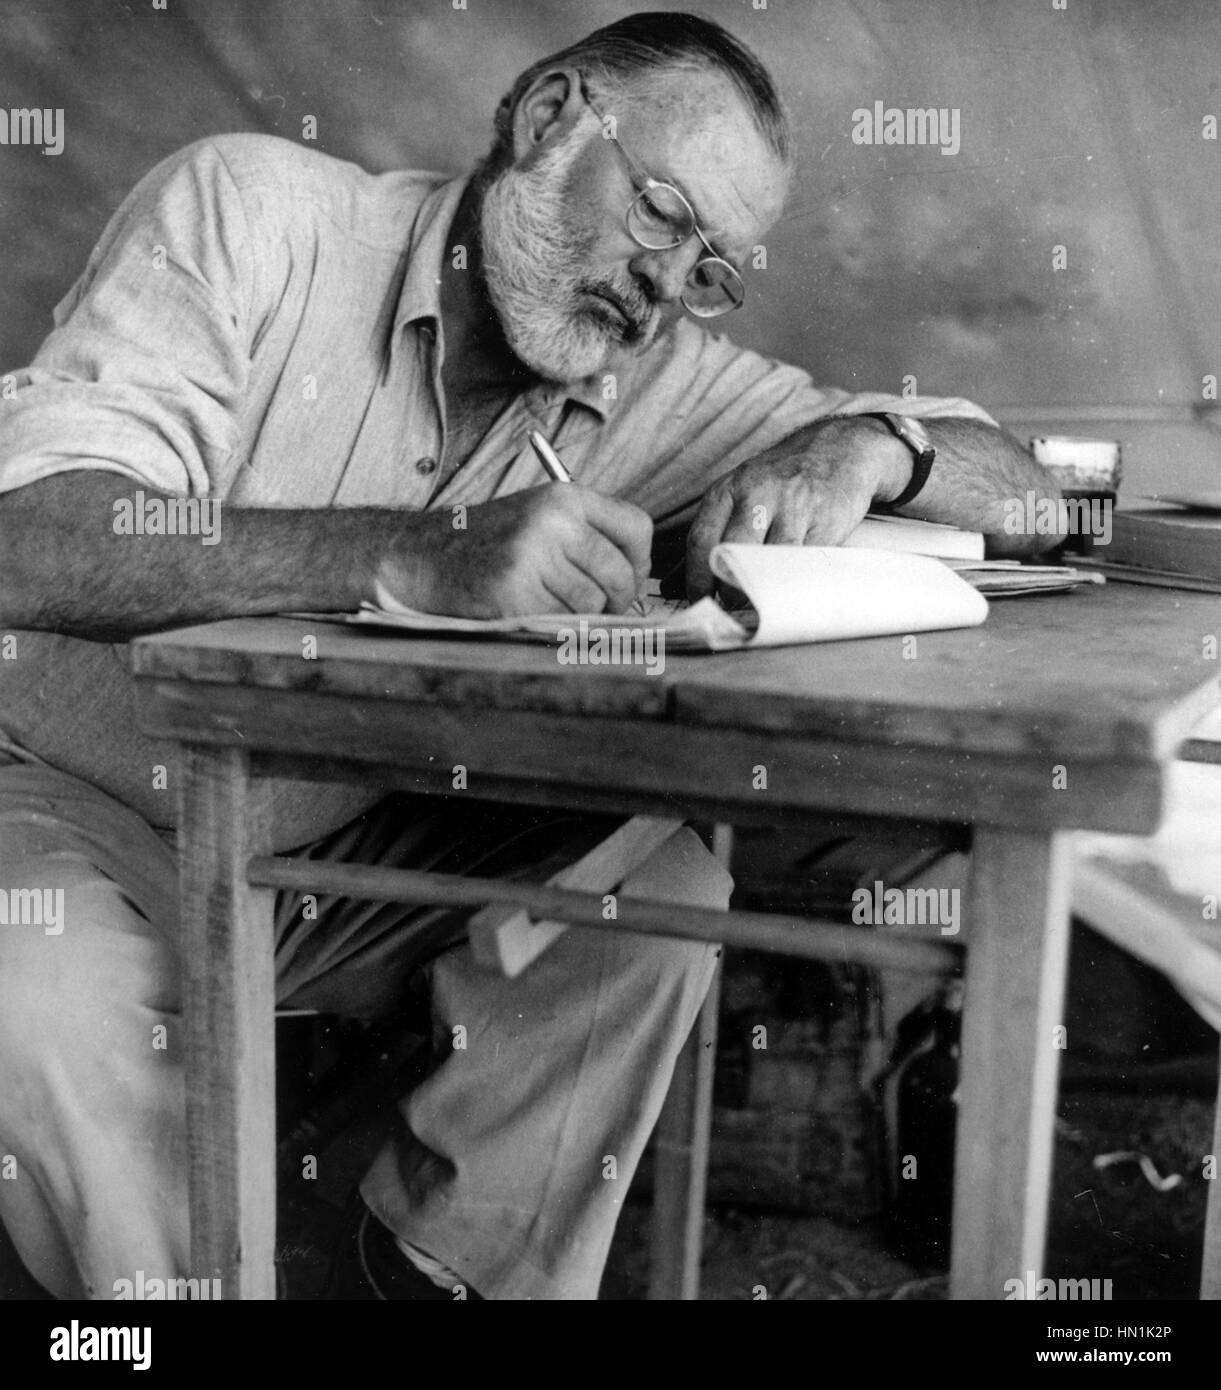 ERNEST HEMINGWAY (1899-1961) American writer and journalist in Kenya about 1952. Photo: Library of Congress Stock Photo